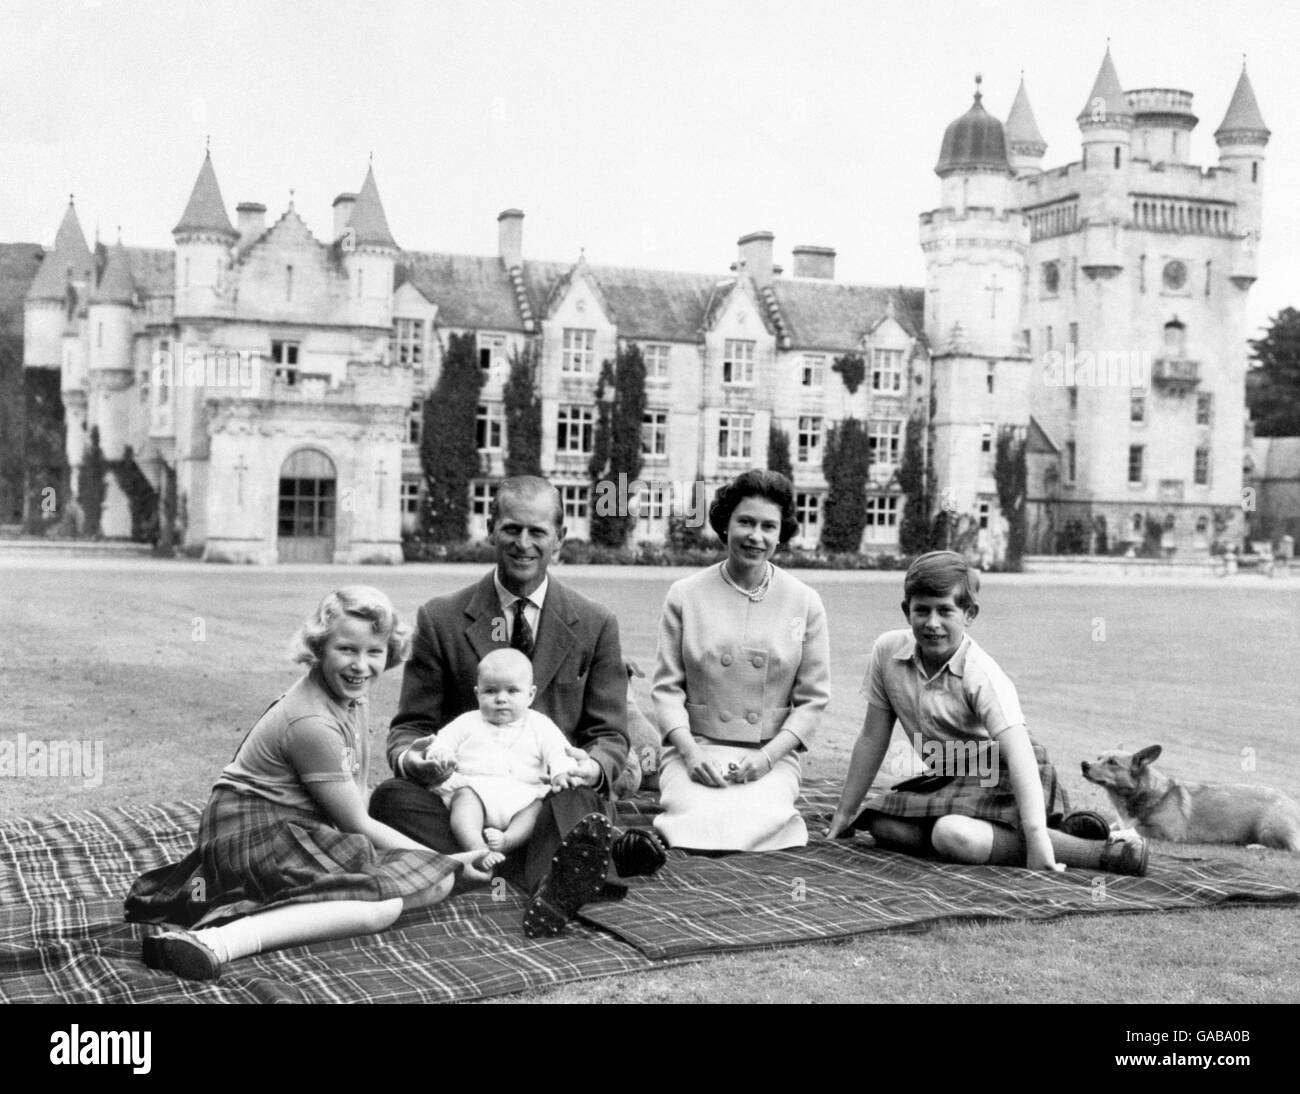 Making a happy group on the lawns at Balmoral, are the Queen, the Duke of Edinburgh and their three children Princess Anne, Prince Charles and baby Prince Andrew, on his father's knees. Stock Photo